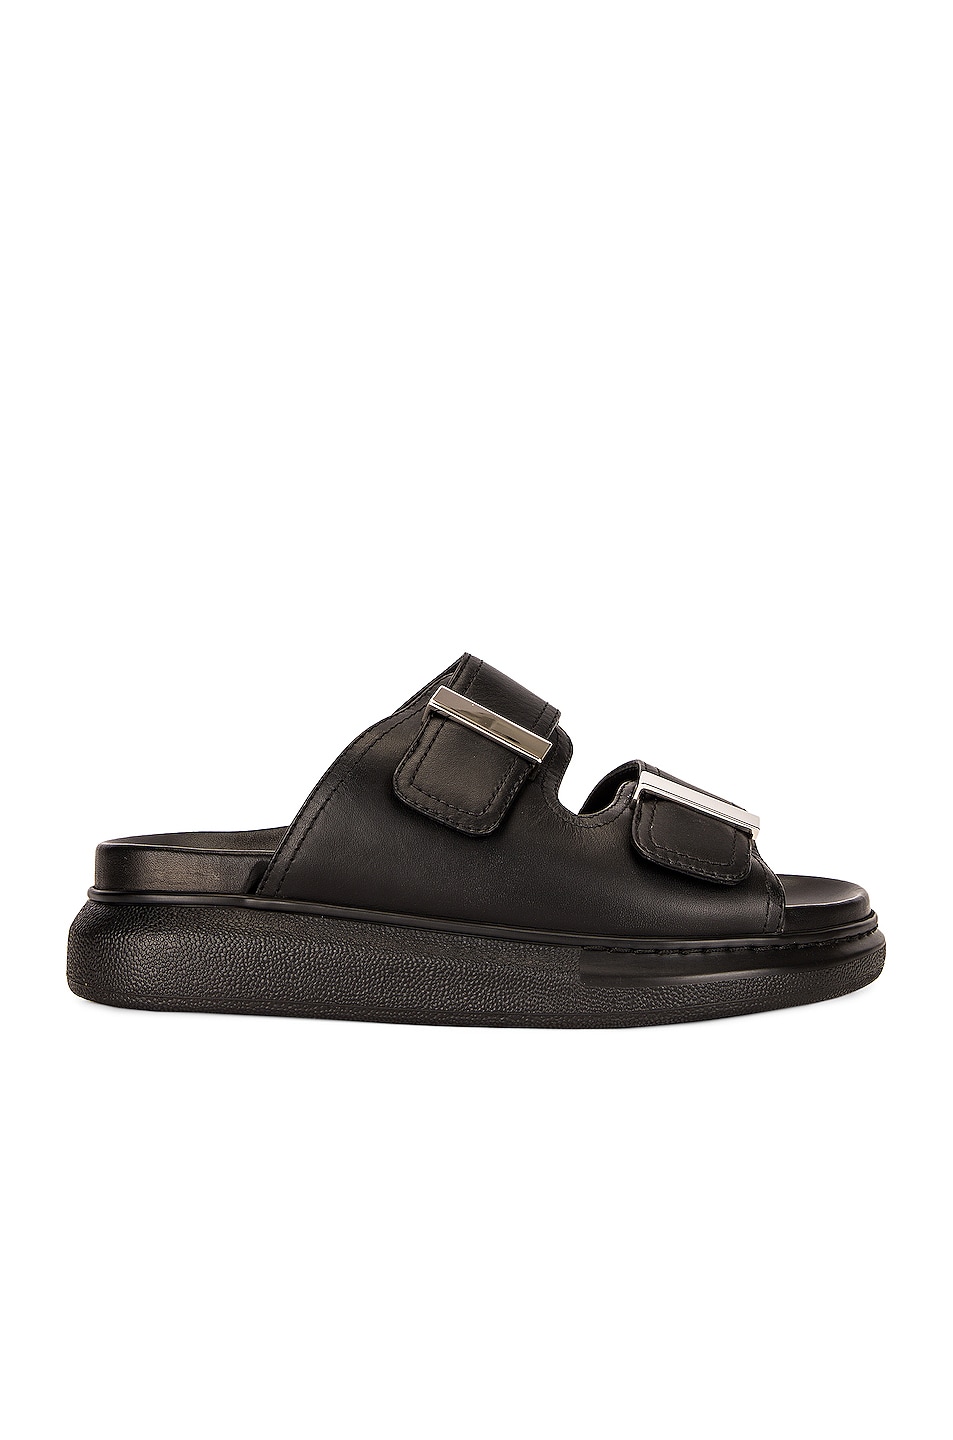 Image 1 of Alexander McQueen Leather Sandals in Black & Silver